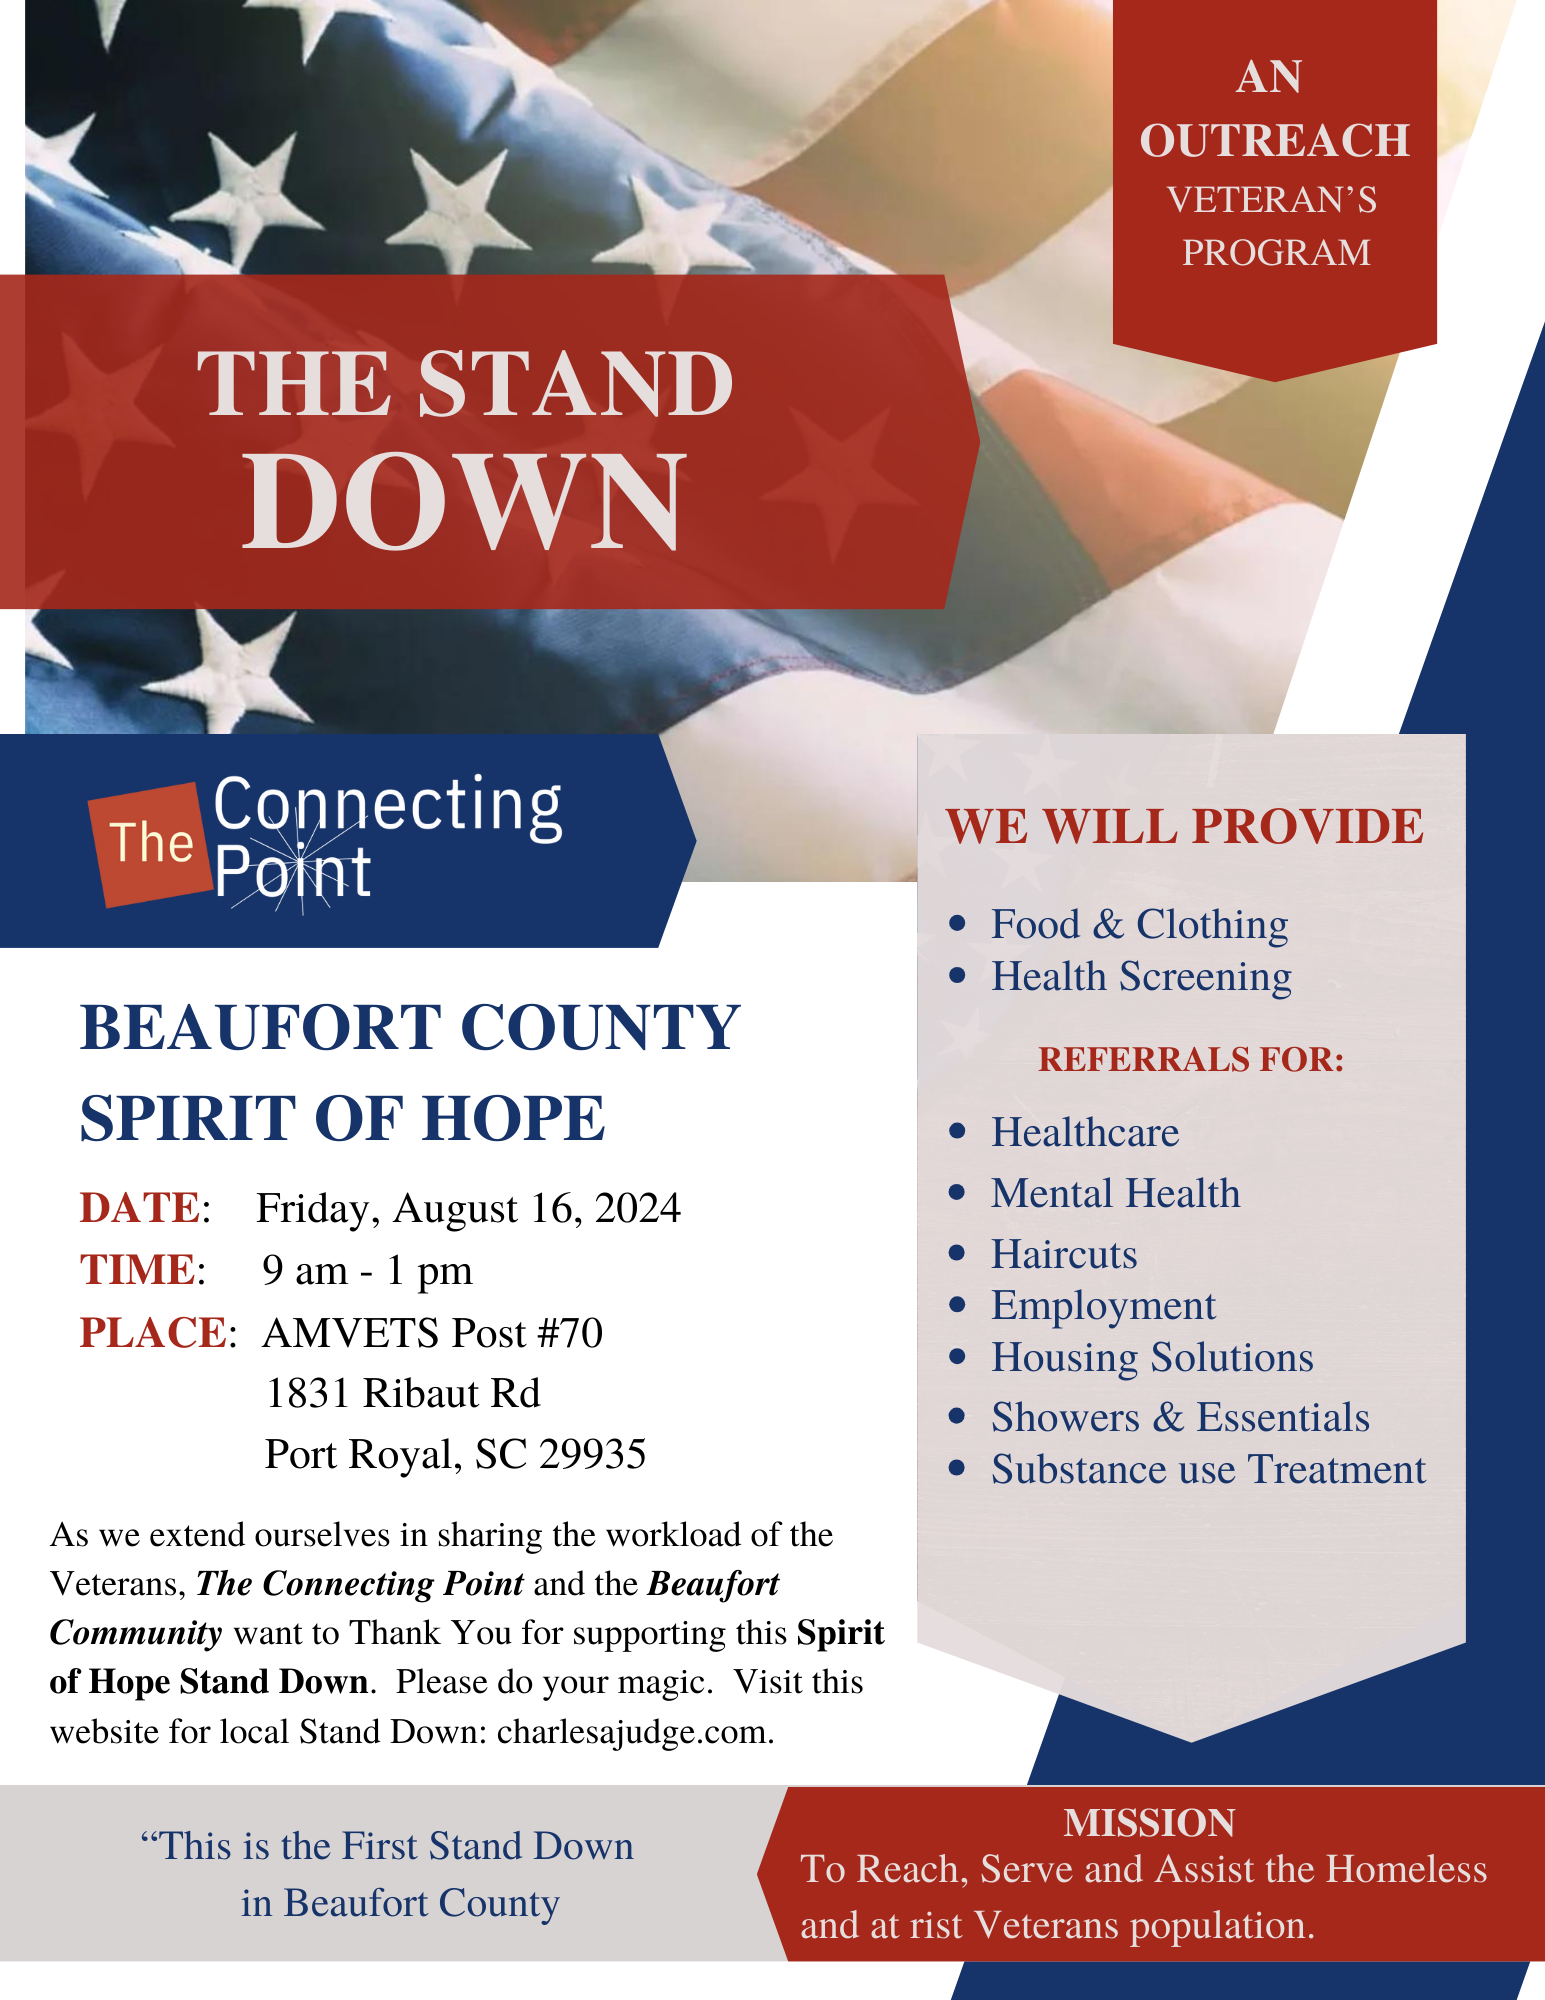 The Stand Down event for Veterans